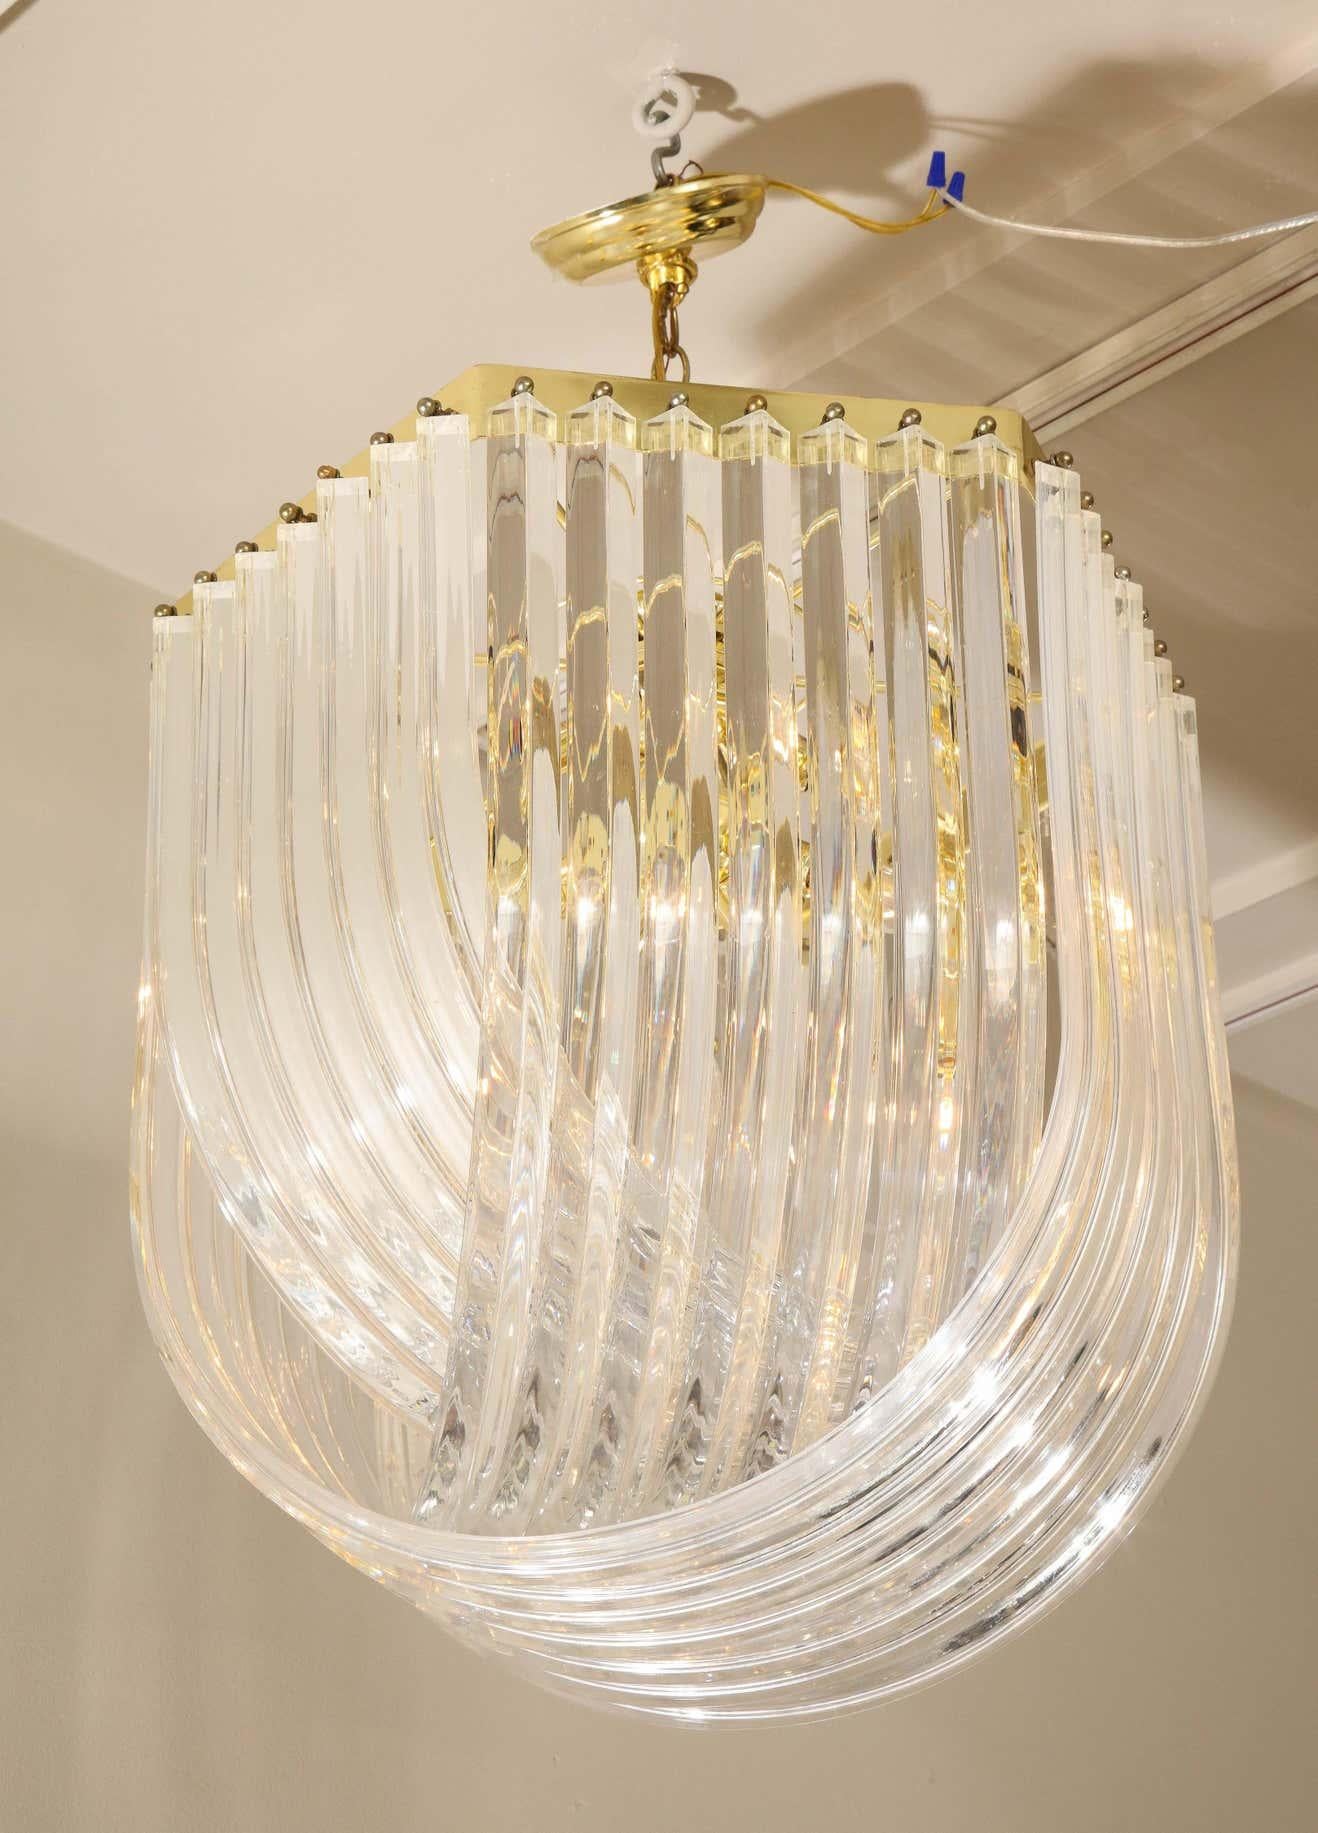 Midcentury Curved Lucite Ribbon Chandelier in Brass For Sale 1